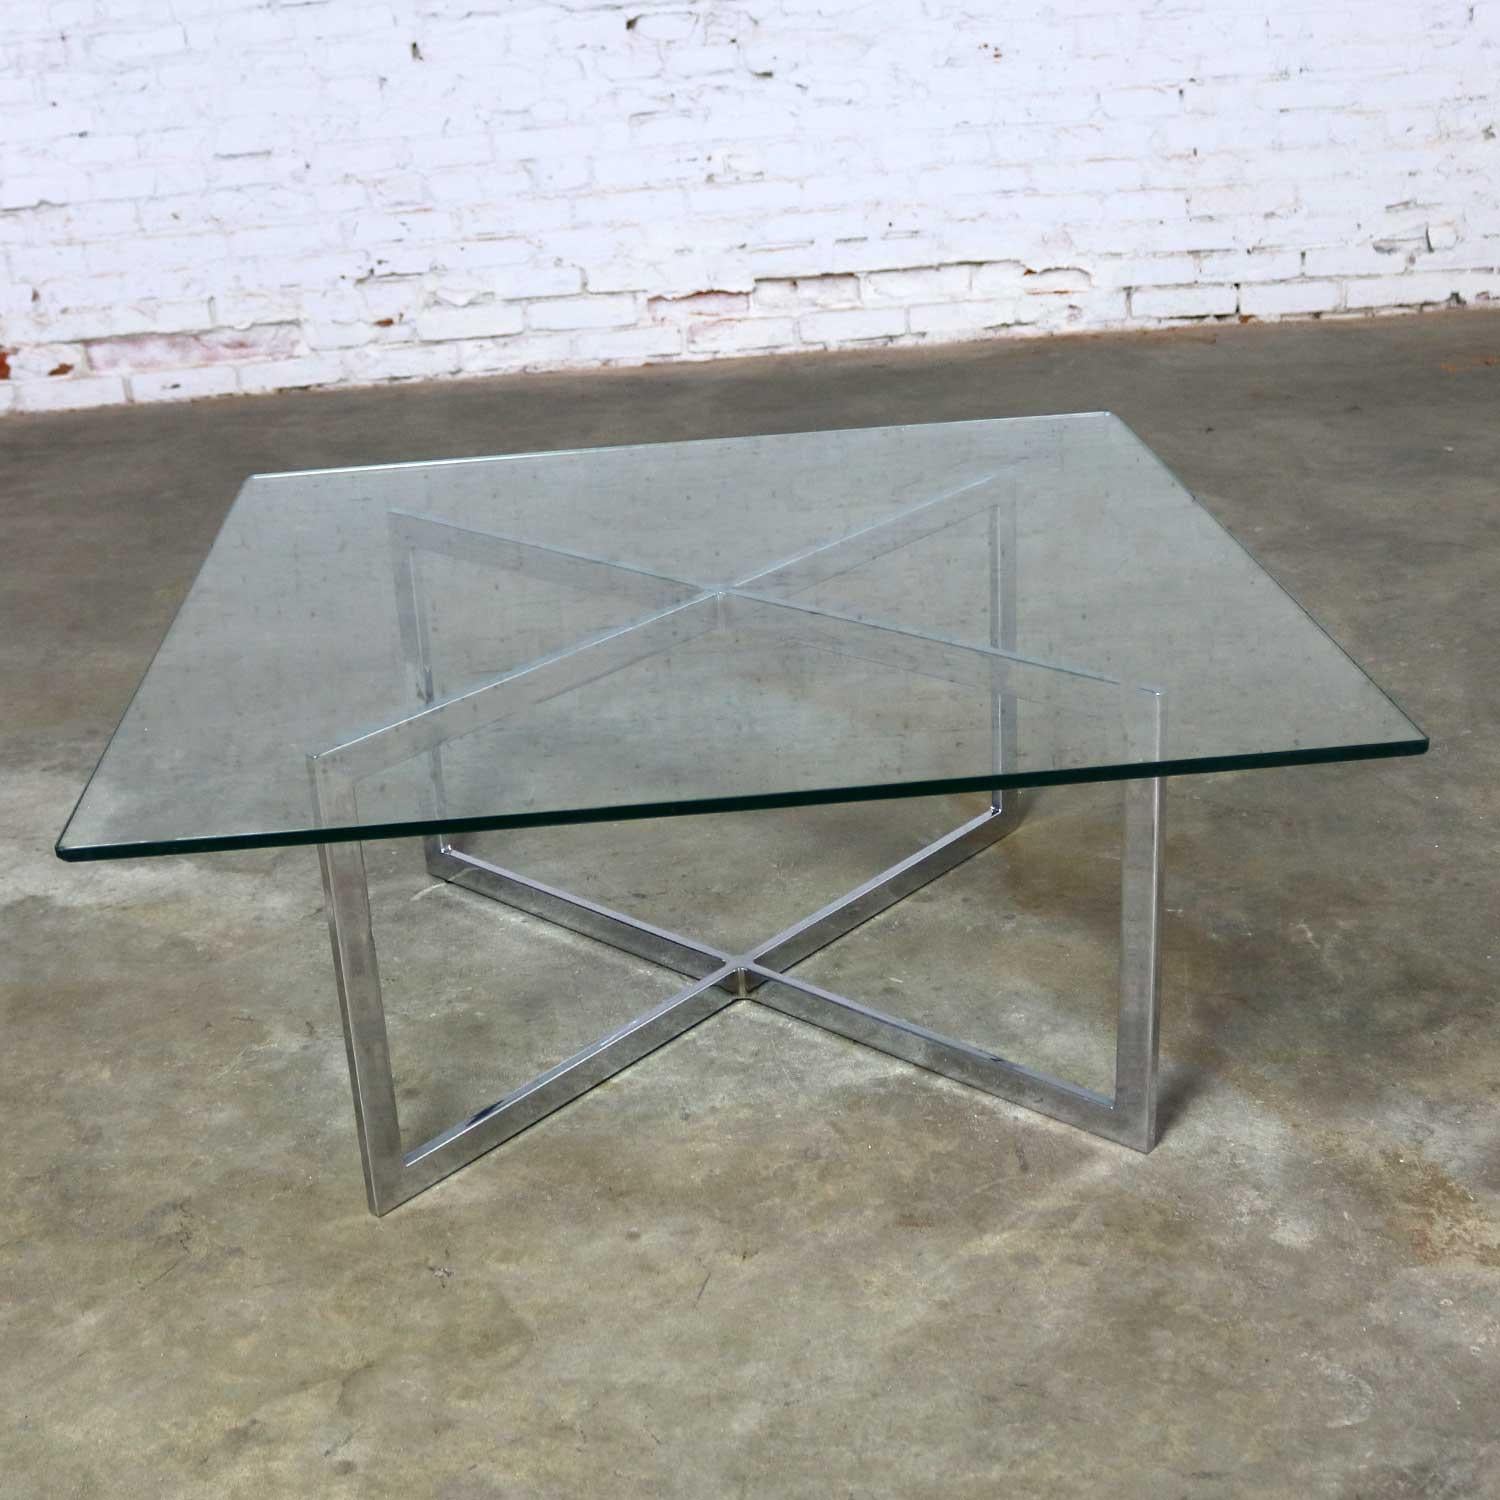 20th Century Square Mid-Century Modern Chrome X-Base Glass Top Coffee Table after Baughman